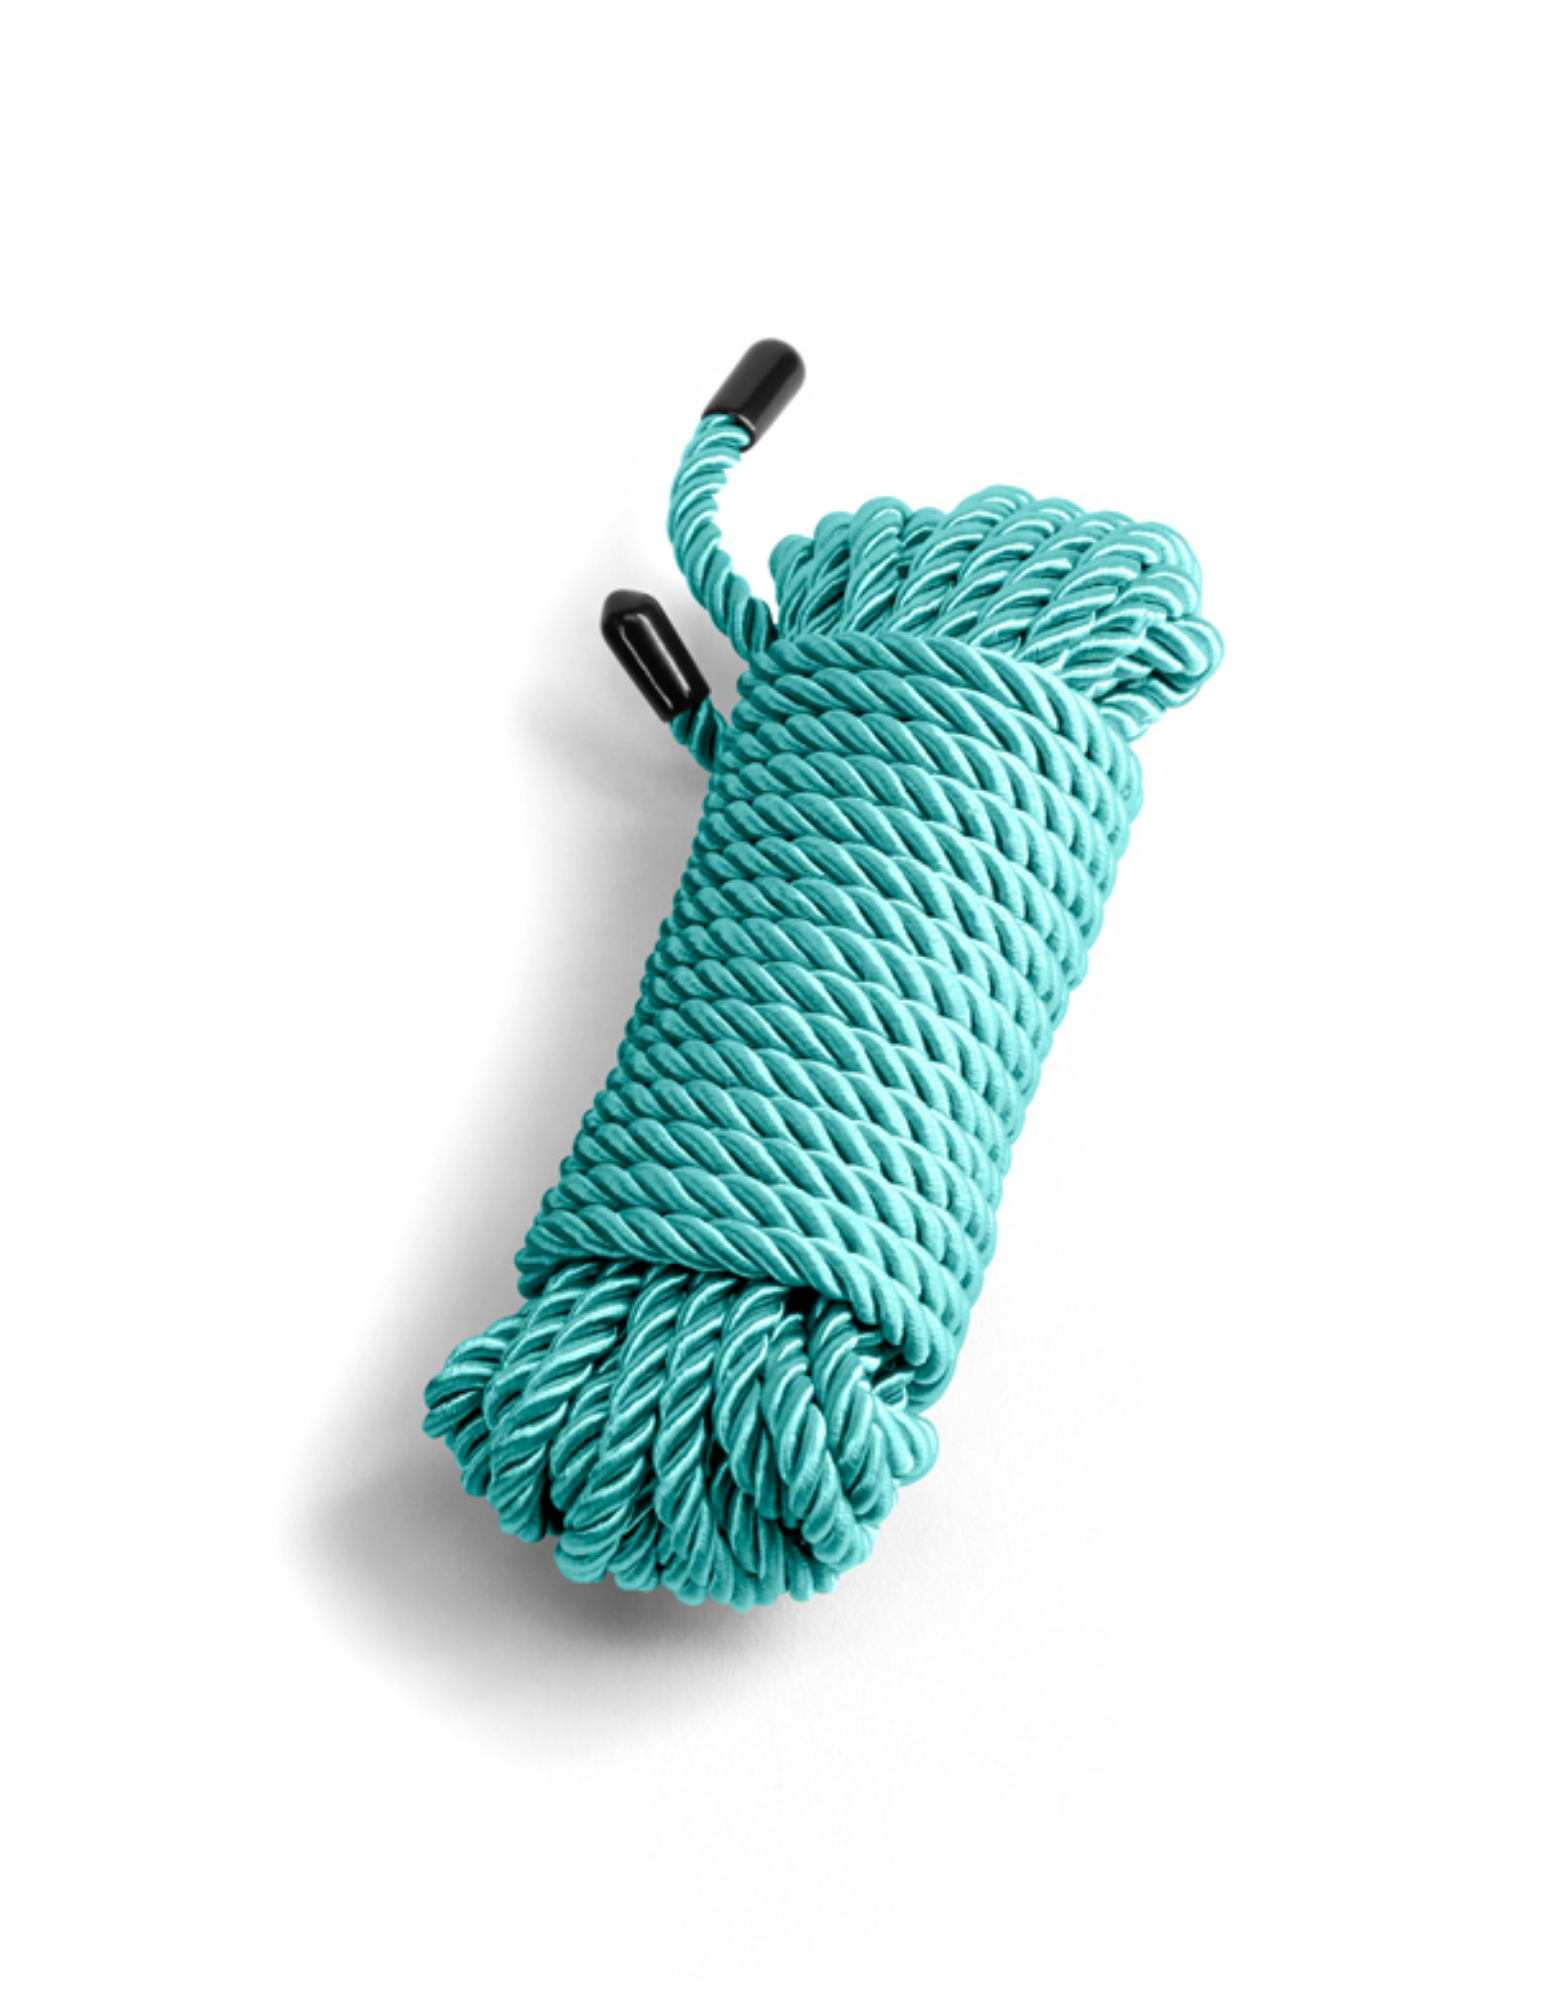 Close-up of the bundle of Bound Rope from NS Novelties (green) shows its soft texture and finished ends.